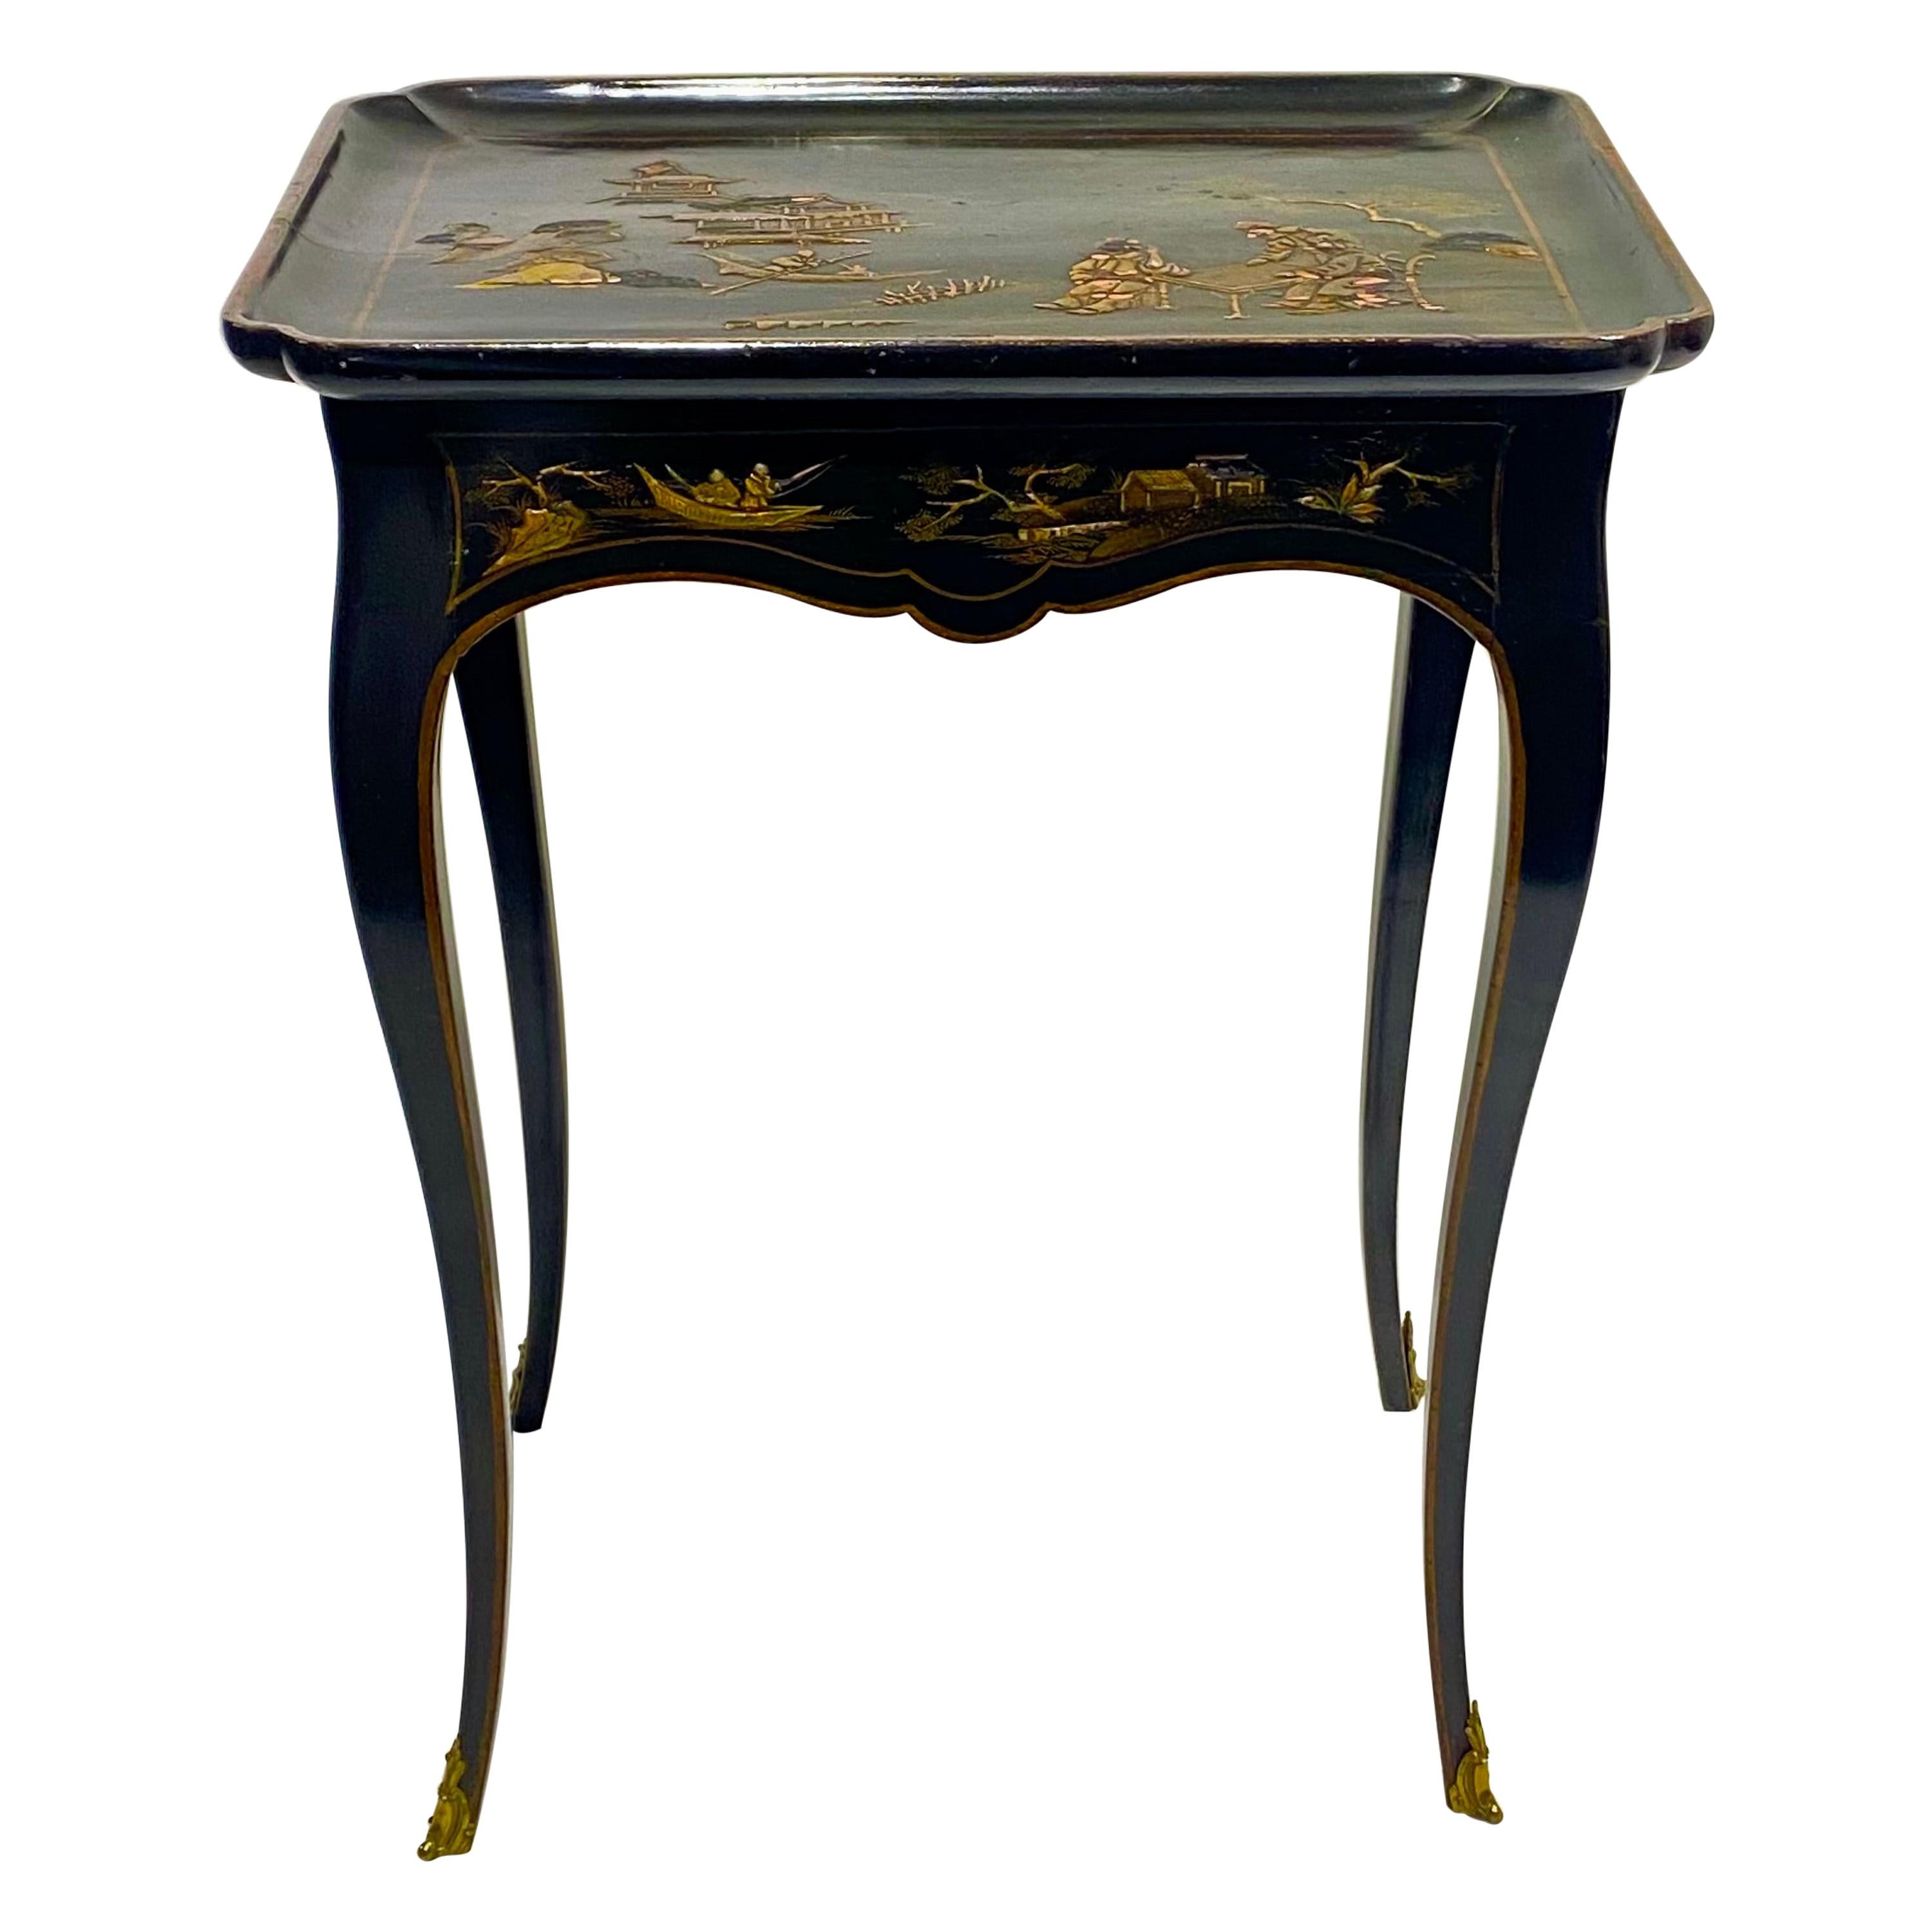 French Louis XV Black and Gilt Lacquered Coromandel Tray Table, 18th Century